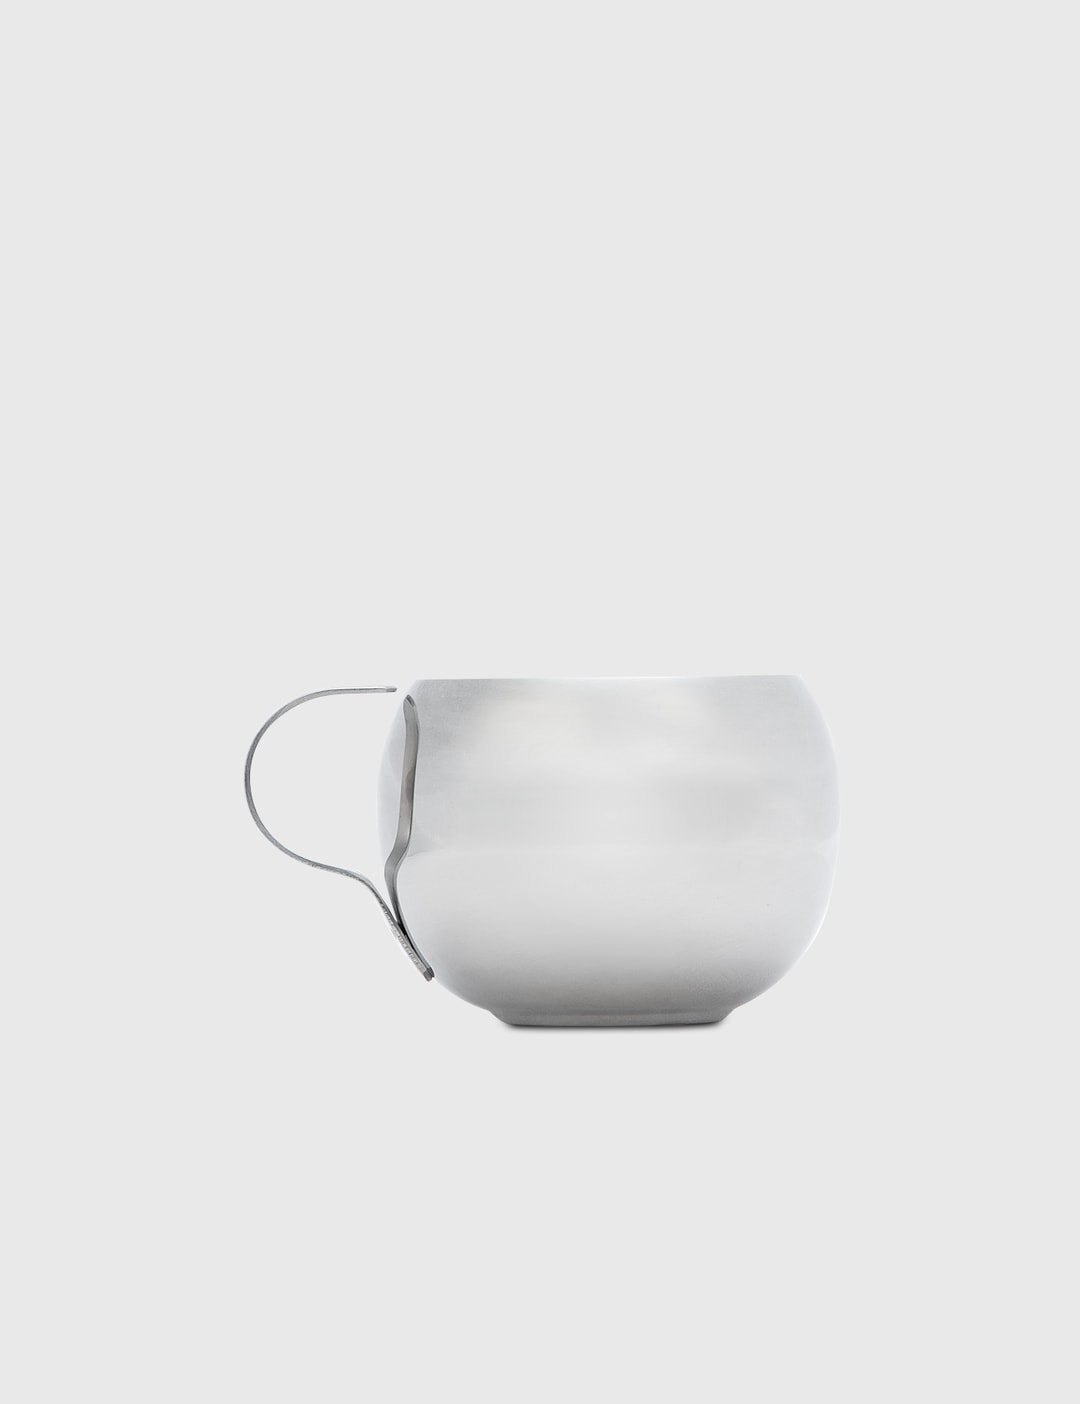 https://image-cdn.hypb.st/https%3A%2F%2Fs3.store.hypebeast.com%2Fmedia%2Fimage%2Fbc%2F9b%2Fgsi-outdoors-silver-glacier-stainless-double-walled-espresso-cup-life-cup_1_1-79ddfb0da8ca1b13101aef6f476d.jpg?fit=max&w=1080&q=90